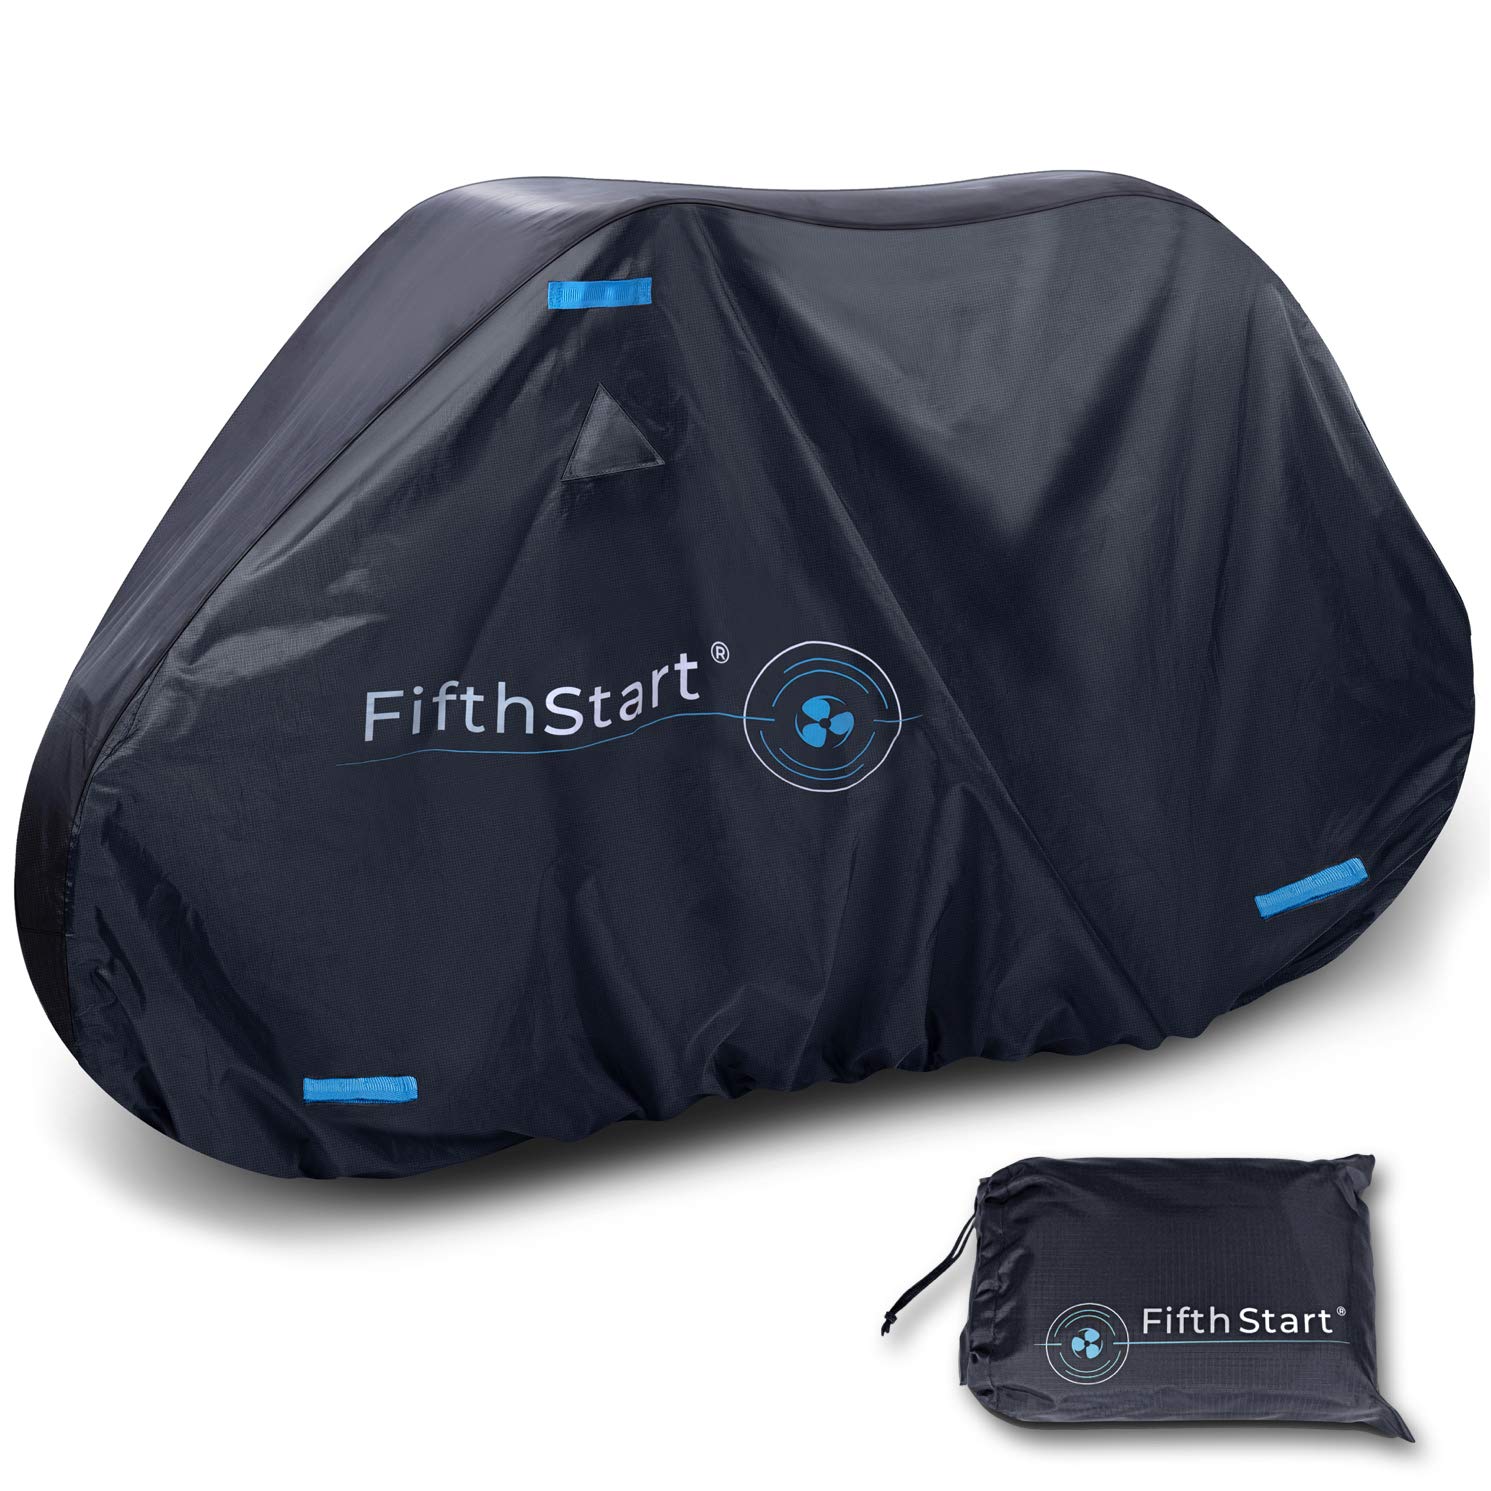  FifthStart Ripstop Bike Cover with Waterproof Rating of  1700mm. This Bicycle Cover Waterproof Outdoor is 210D Double Stitched with  Sealed Seams and Unique Breathe Valves : Sports & Outdoors